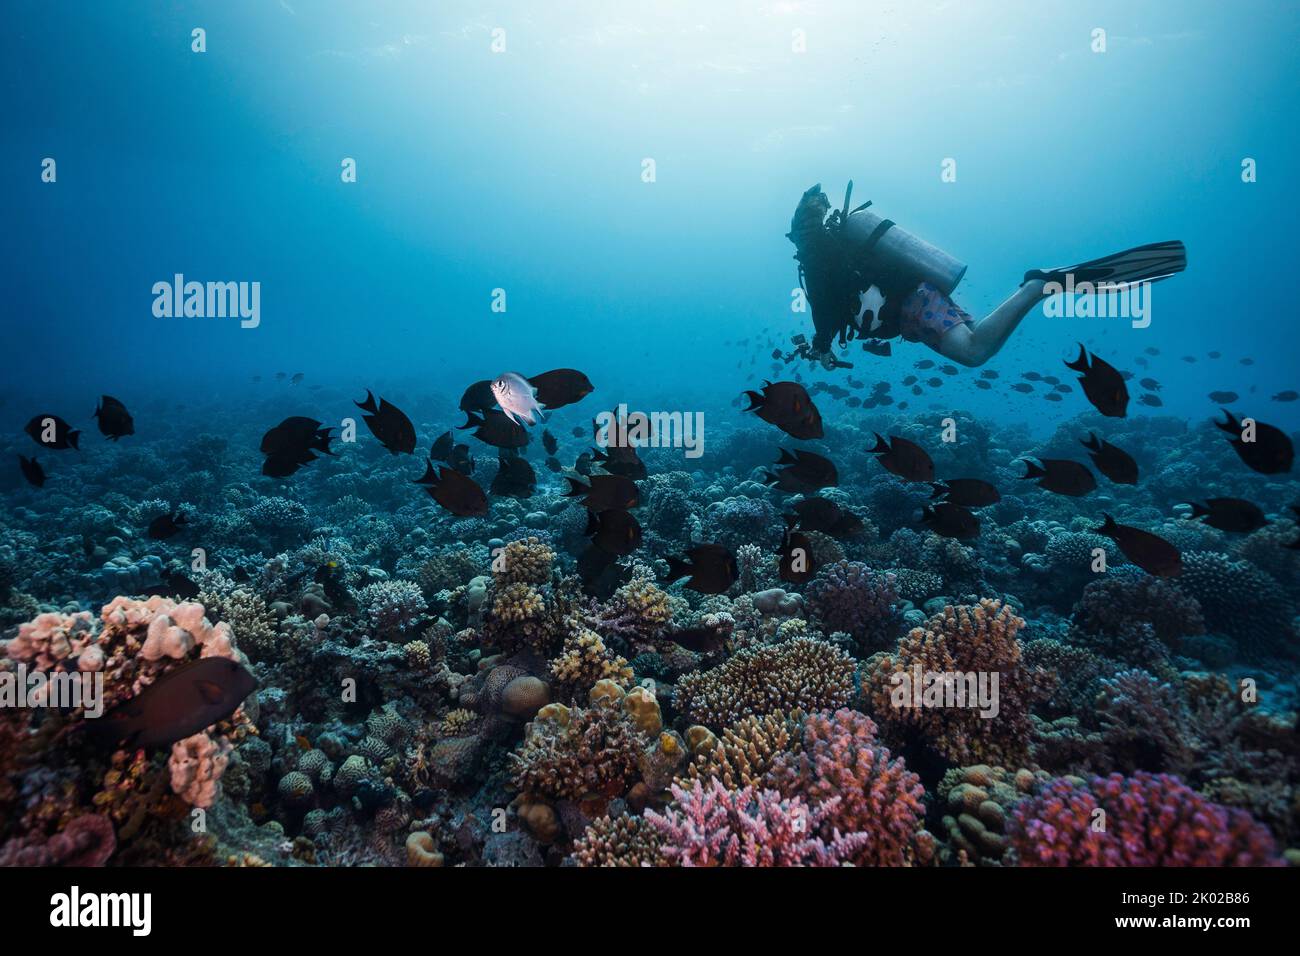 A scuba diver swimming over the vibrant reef holding an action camera looking at a school of fish in the distance Stock Photo